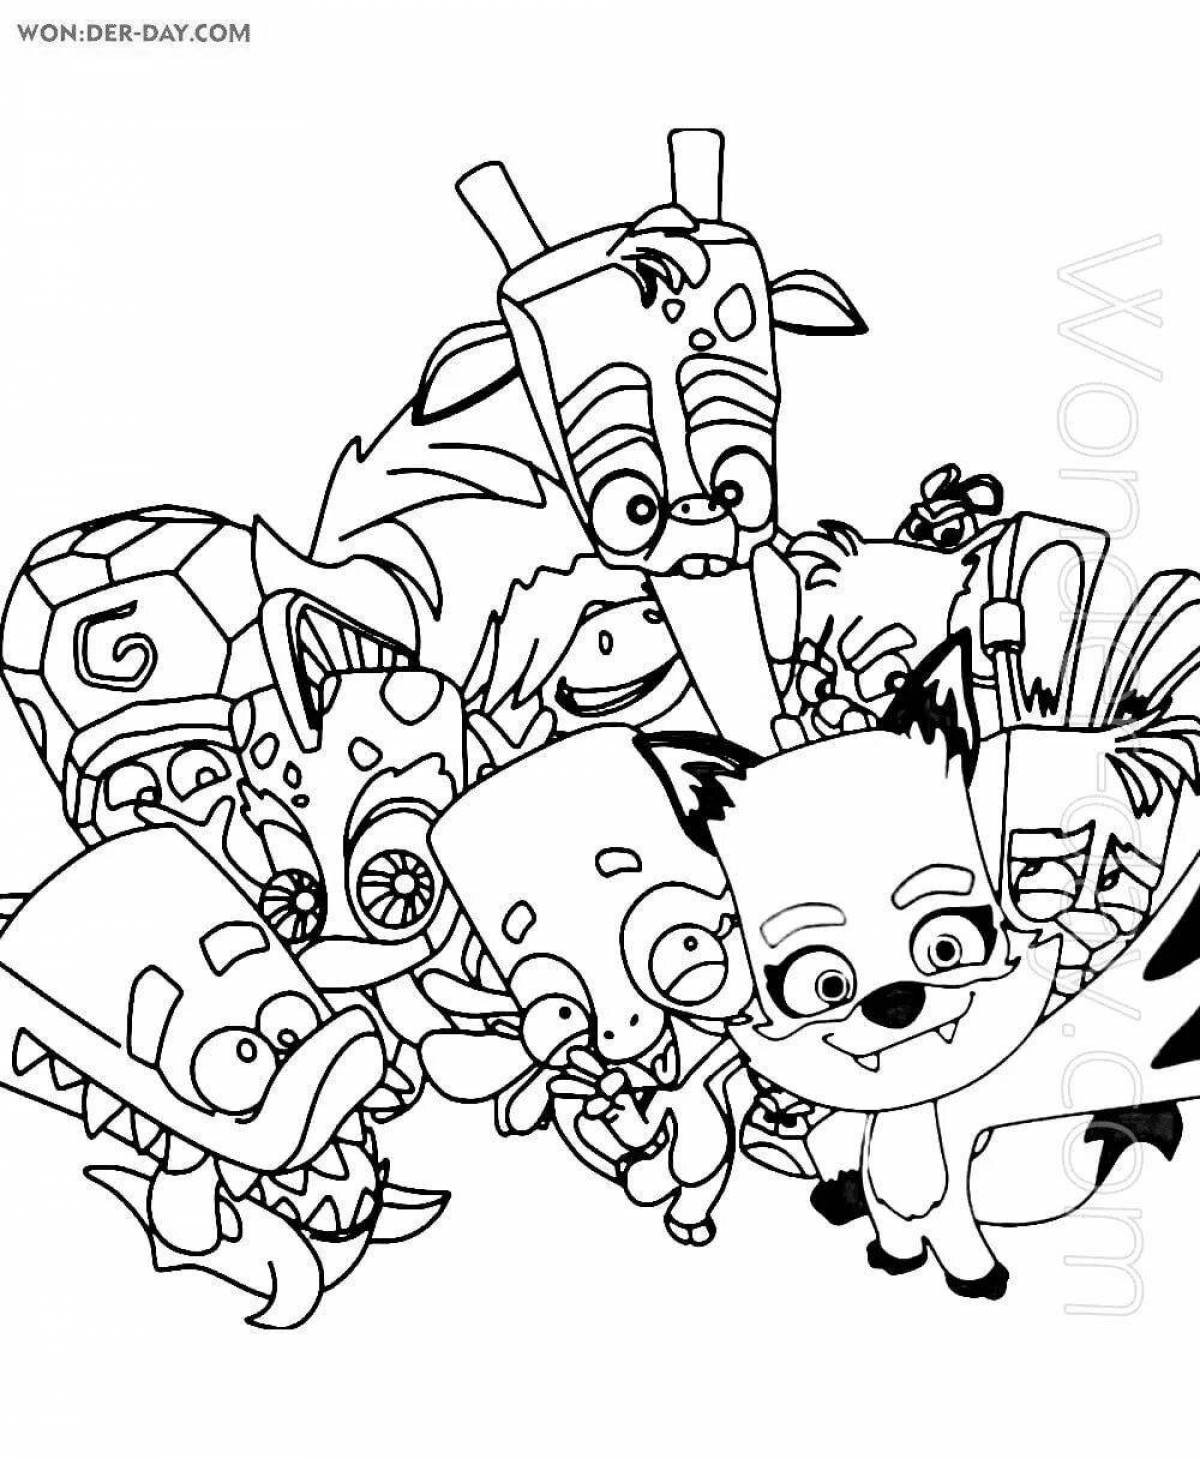 Magic Tooth Coloring Page